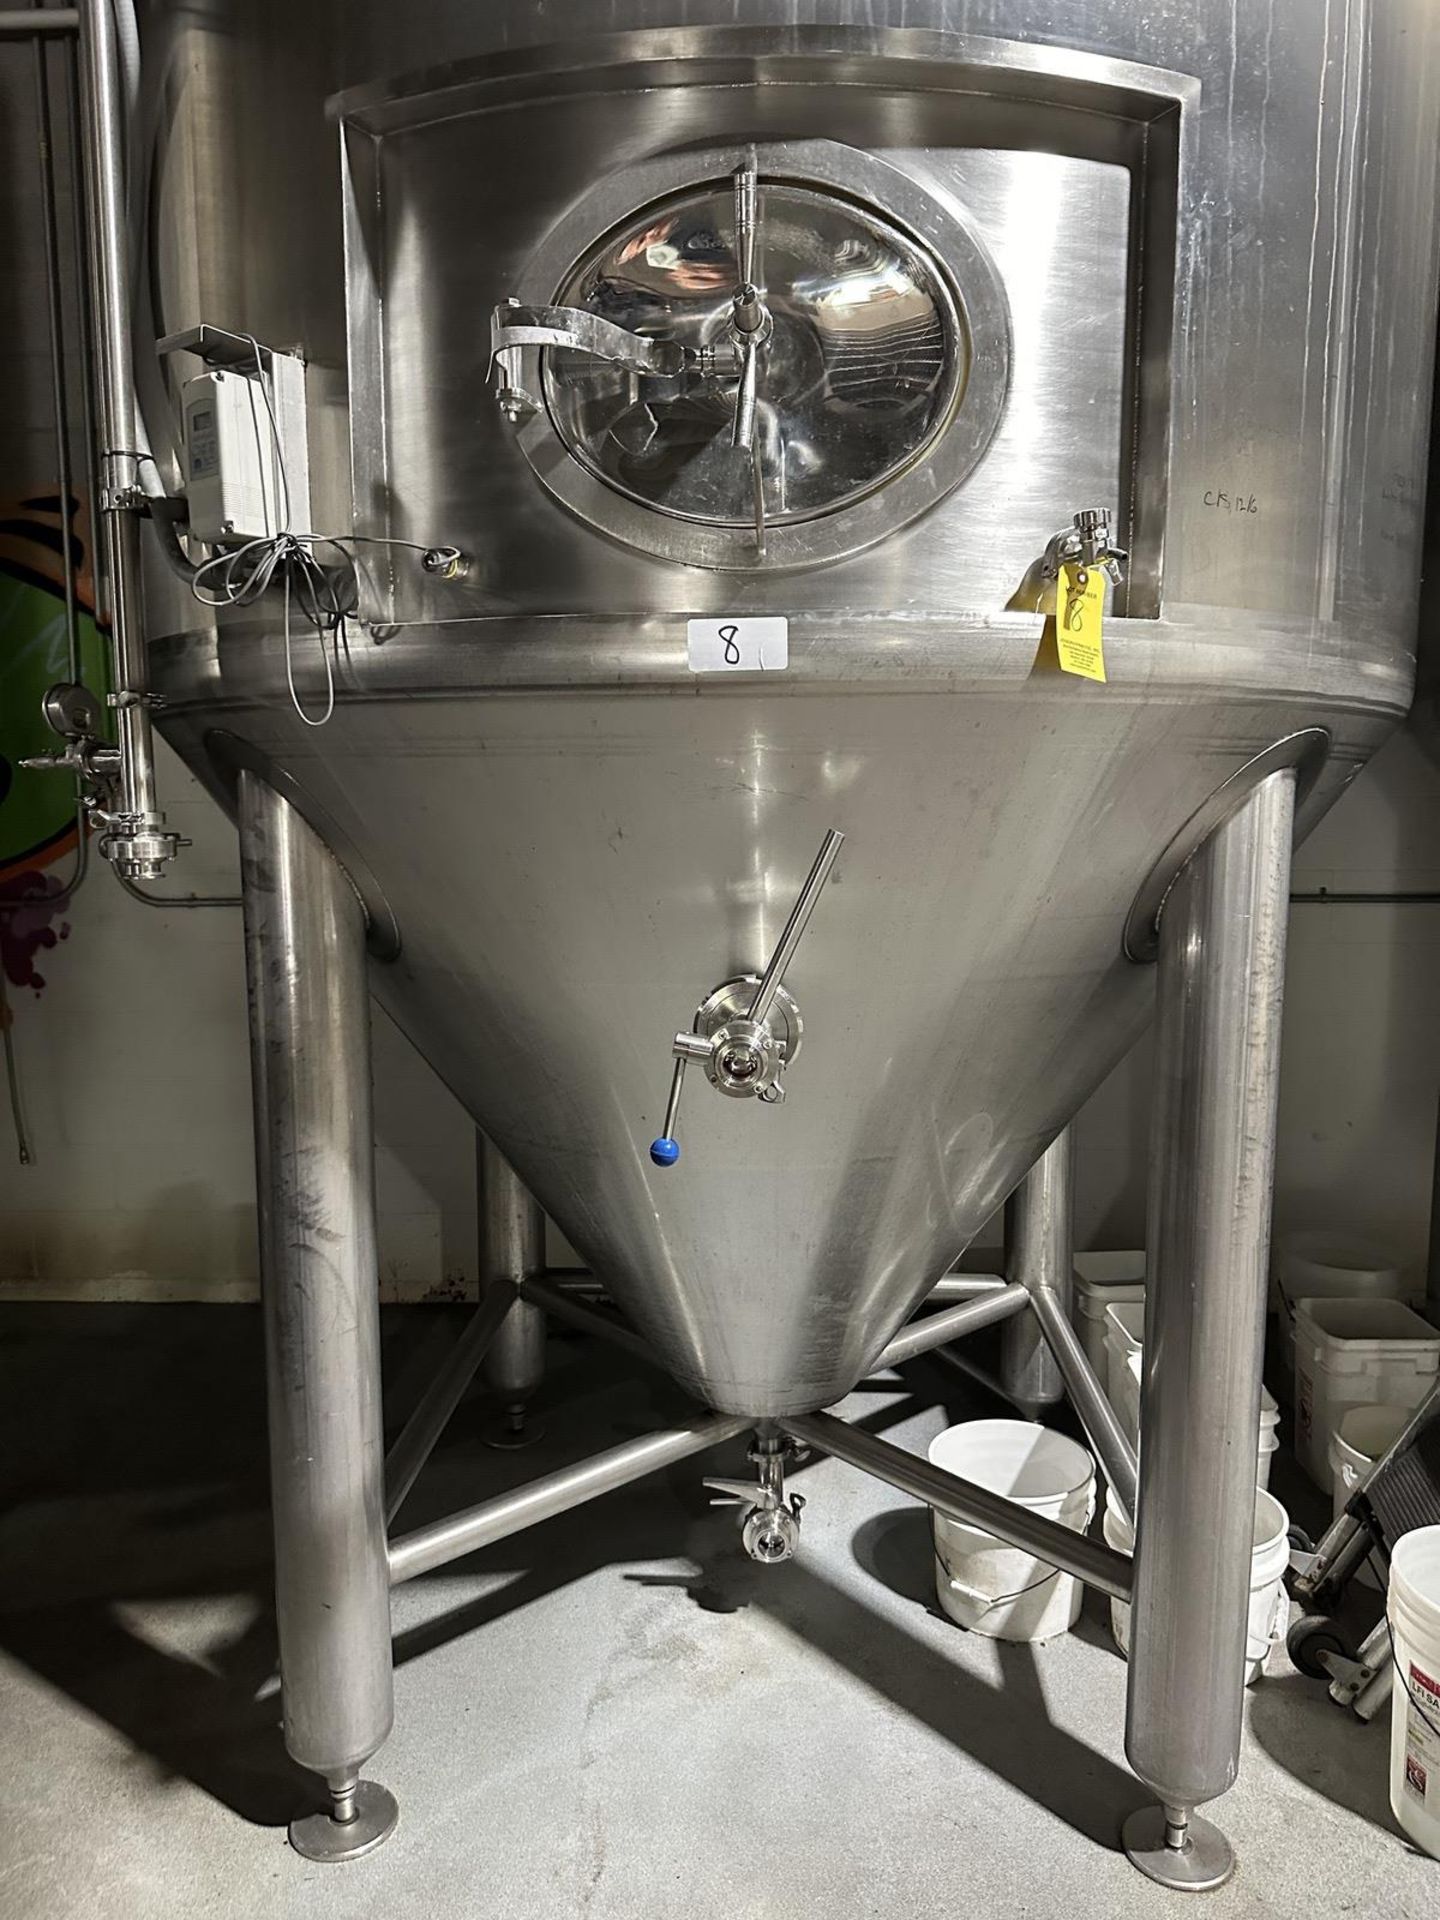 Criveller 60 BBL Stainless Steel Fermenter, Glycol Jacketed, s/n 1093-2, Nema 4X El | Rig Fee $350 - Image 3 of 5